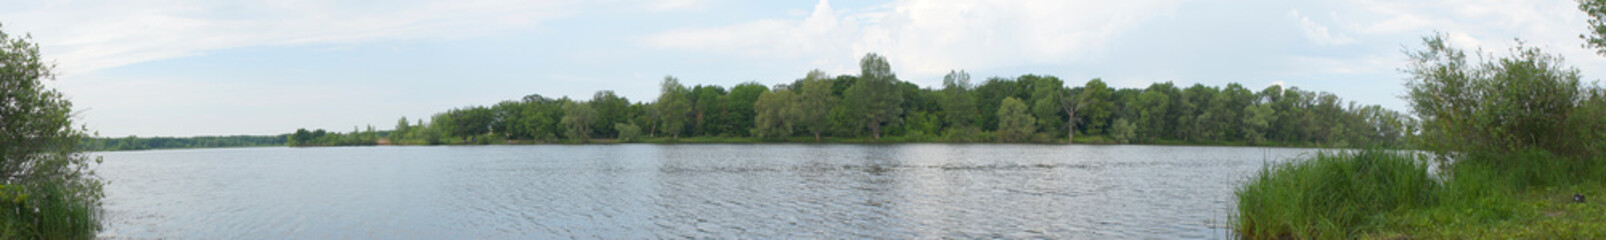 Lake with a forest on the opposite shore